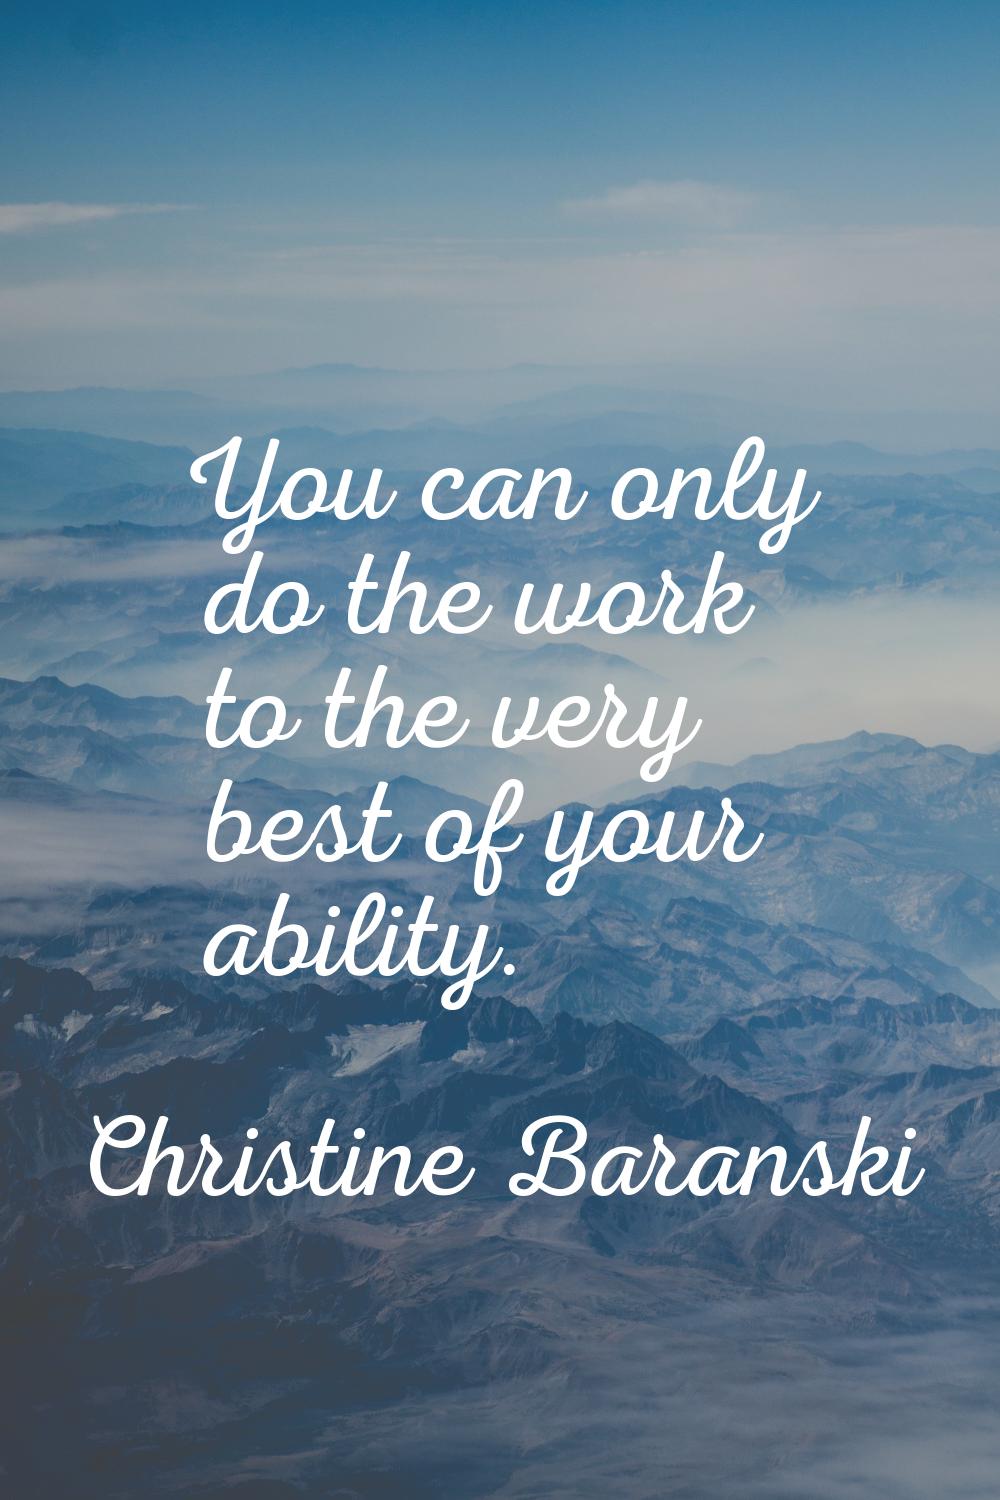 You can only do the work to the very best of your ability.